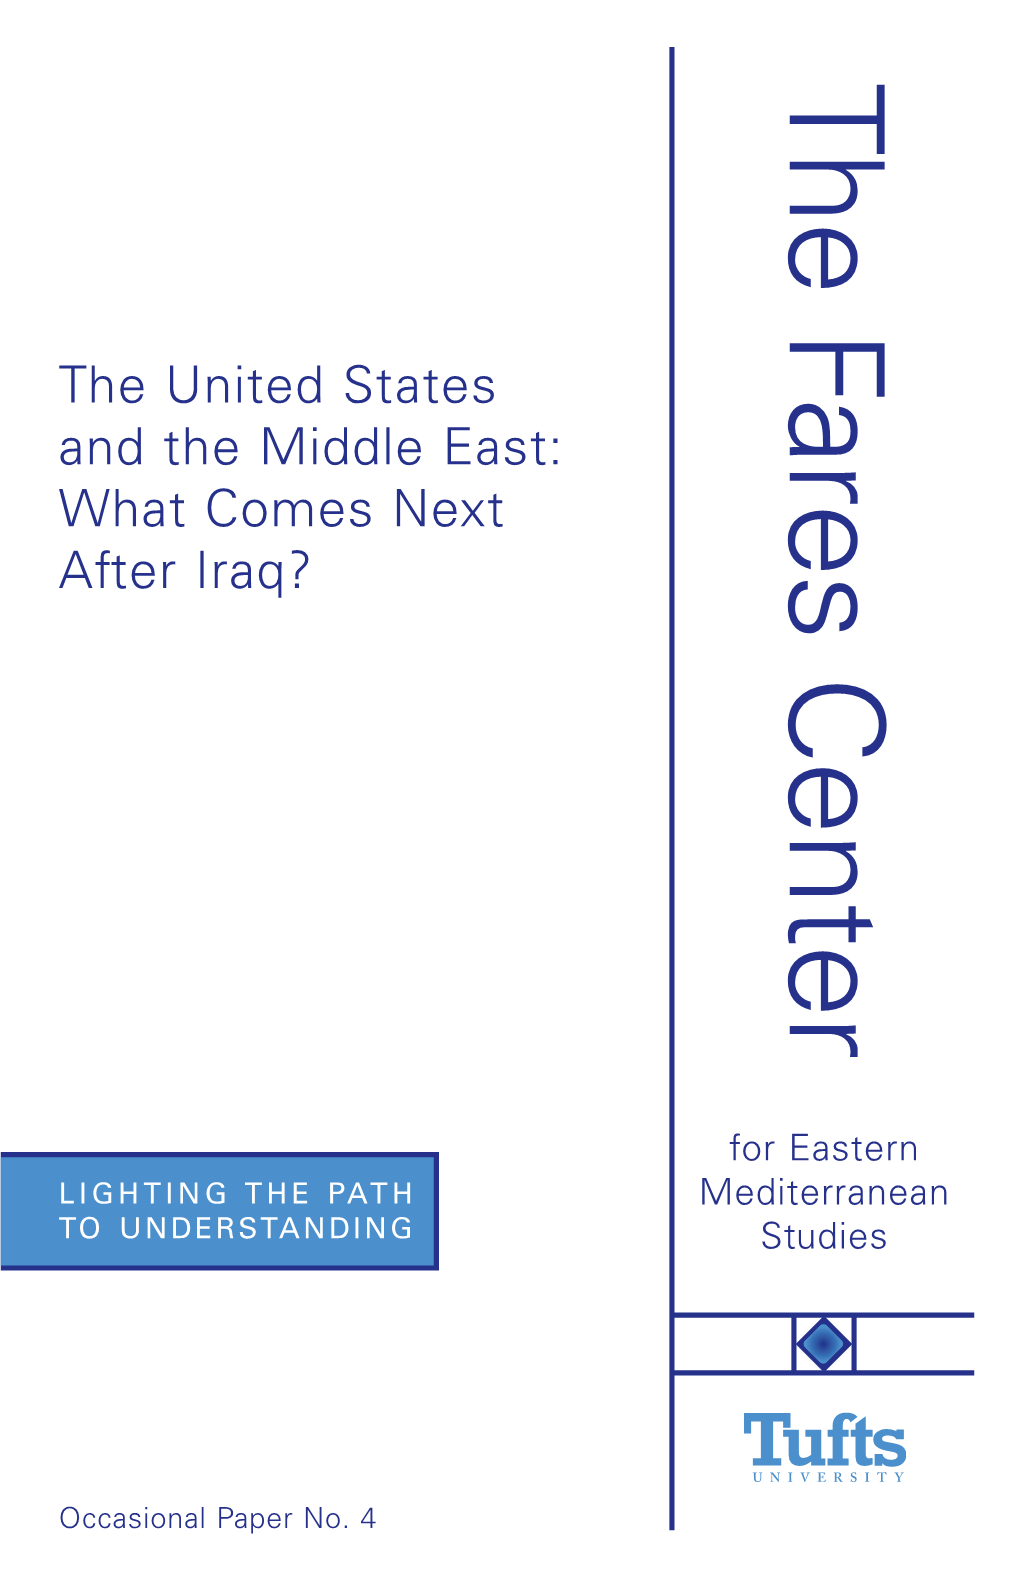 The United States and the Middle East: What Comes Next After Iraq?